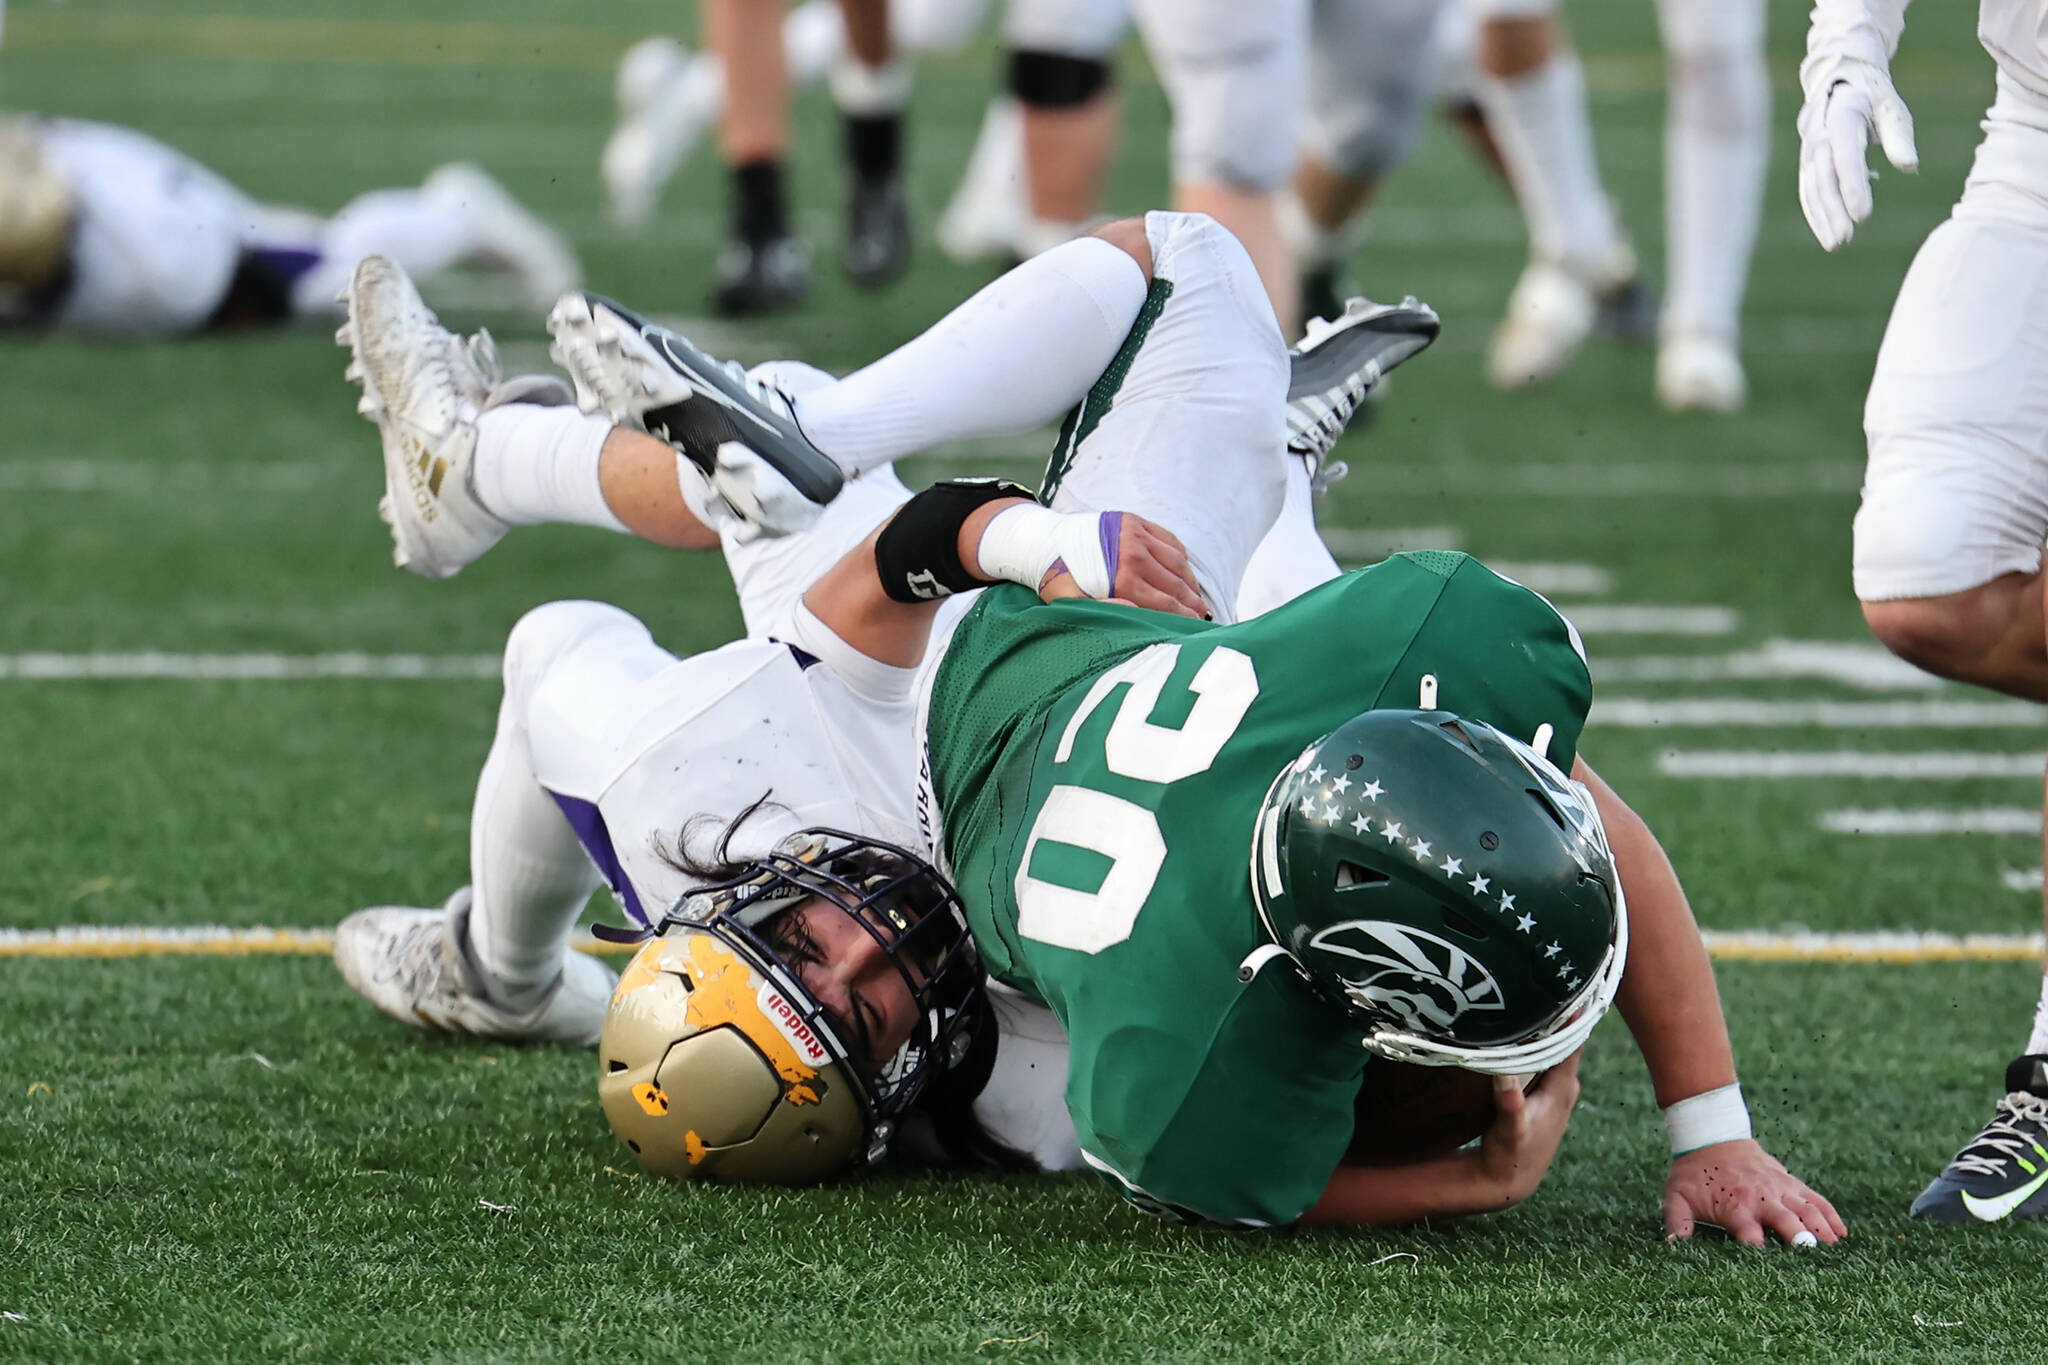 Aiden Finley tackles an opponent during the playoff game at Edmonds Oct. 28. (Photo by John Fisken)